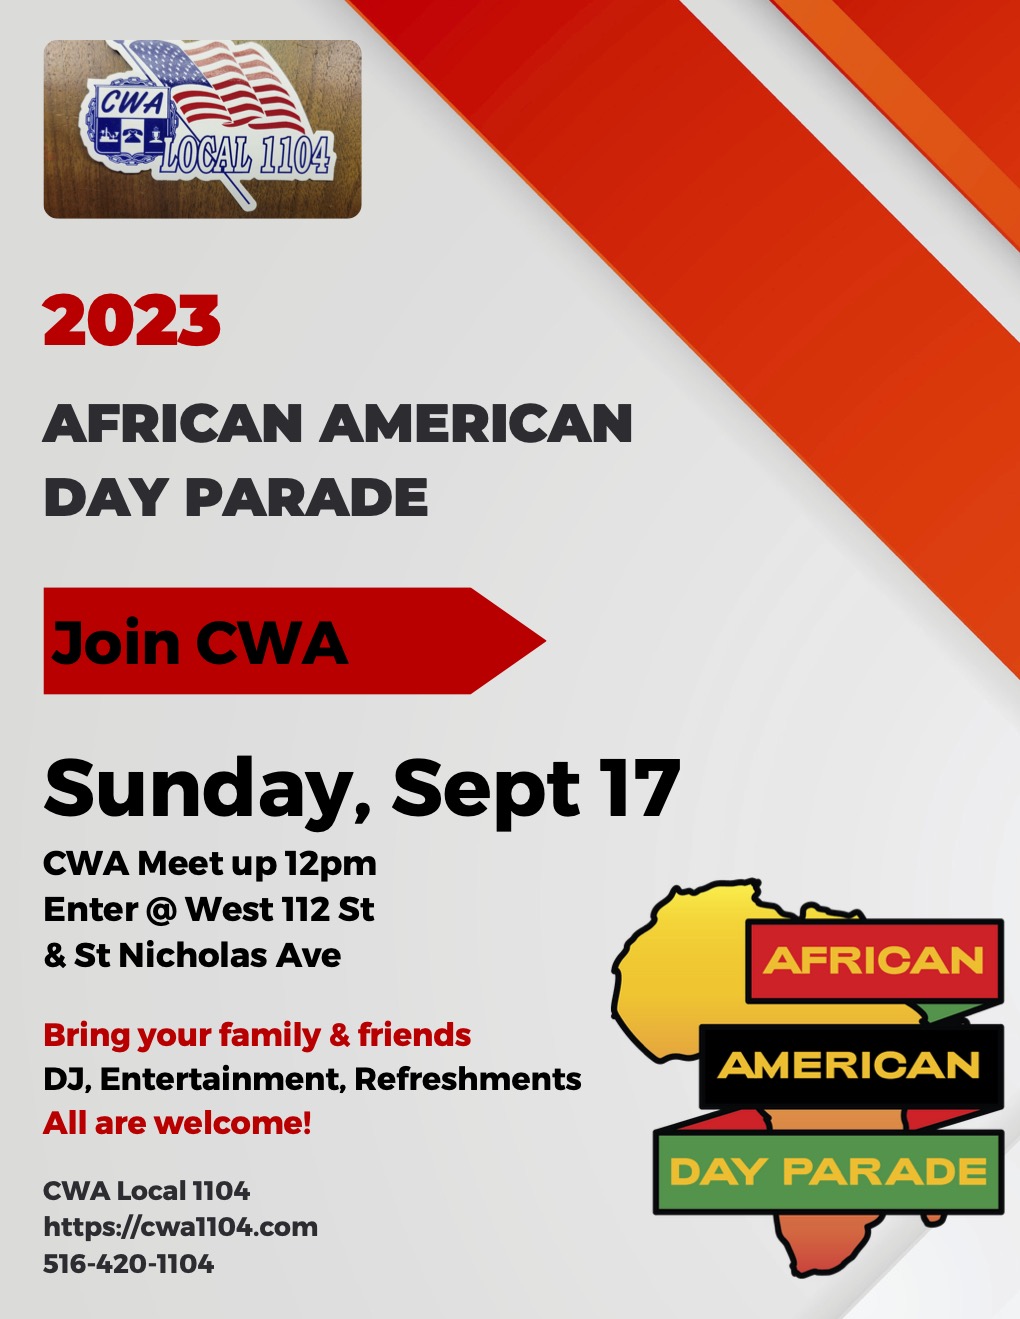 African American Day Parade